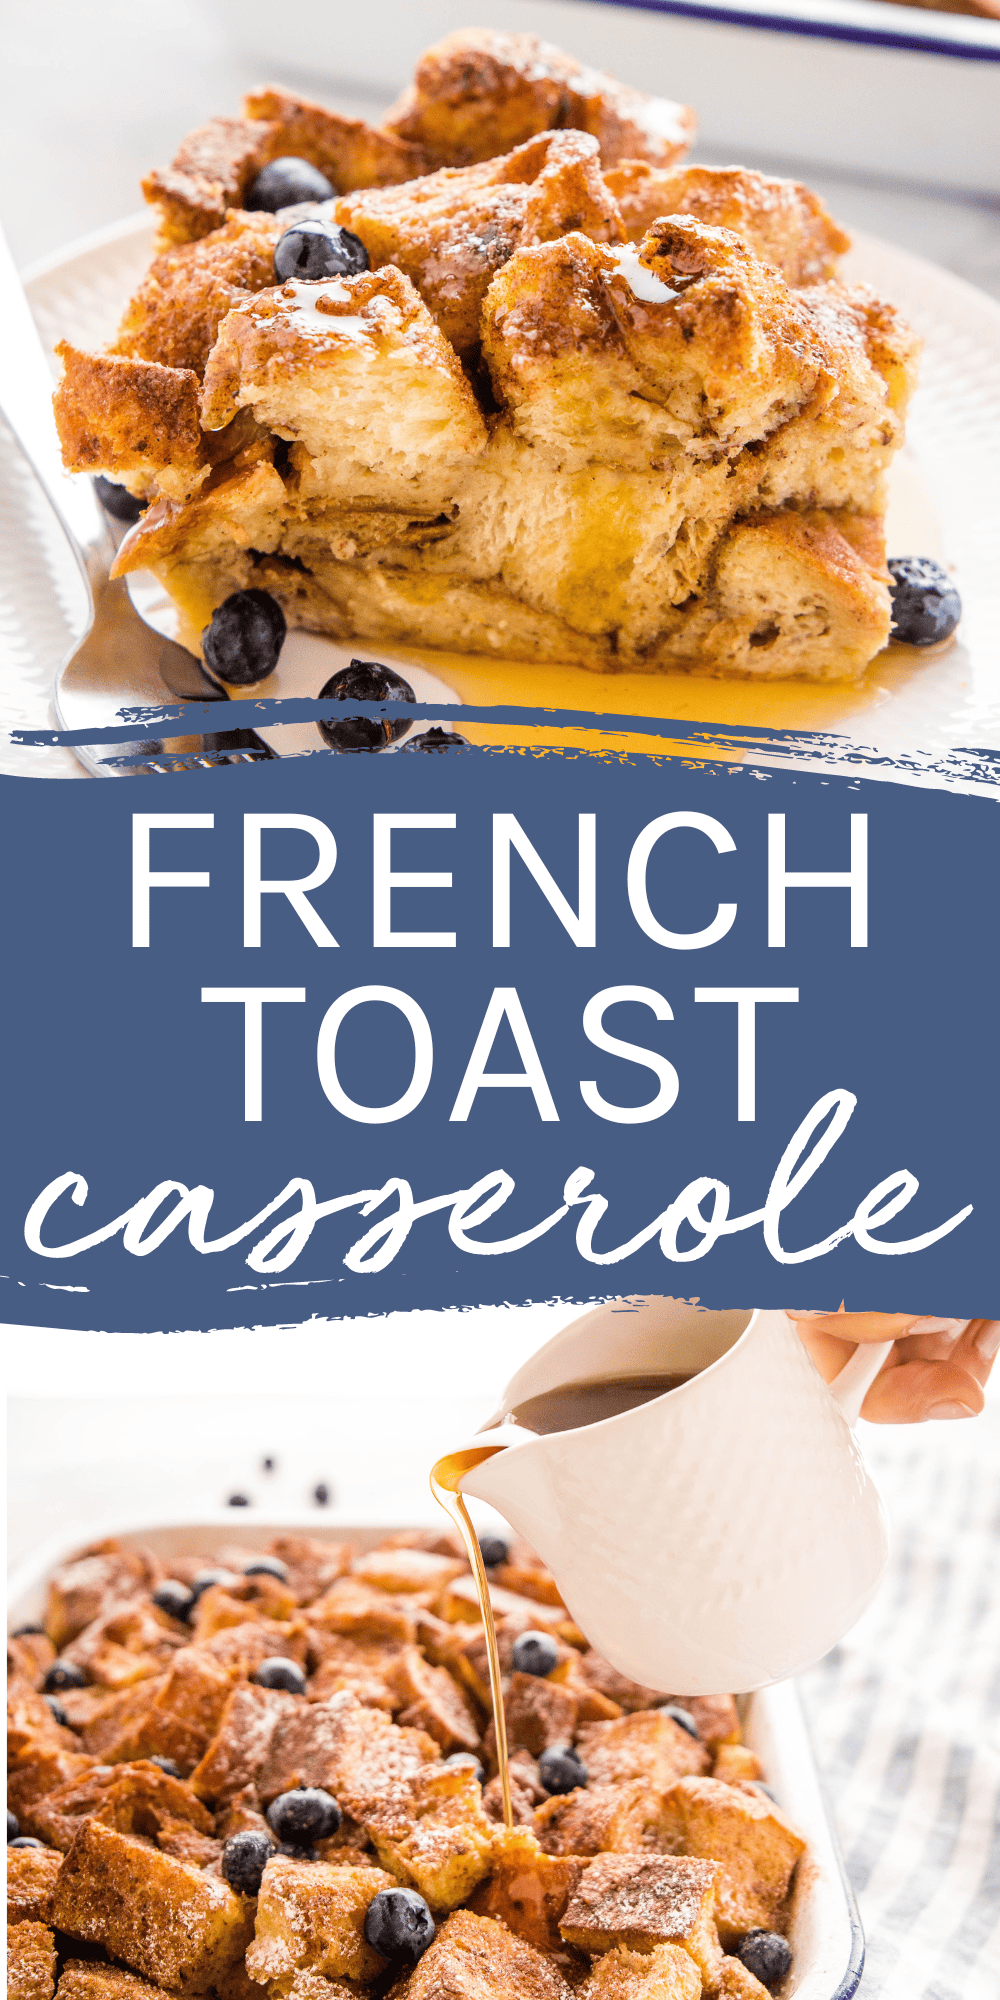 This French Toast Casserole recipe is the best easy make-ahead breakfast that's perfect for a holiday brunch, busy mornings before school, or a simple Saturday breakfast. Ready in under an hour, or refrigerate it overnight for an easy morning treat! Recipe from thebusybaker.ca! #frenchtoastcasserole #easybreakfast #easyfrenchtoastcasserole #overnightfrenchtoastcasserole #simplebreakfast #brunch #holidaybrunch #holidaybreakfast #christmasbreakfast #thanksgivingbrunch #brunchrecipe via @busybakerblog